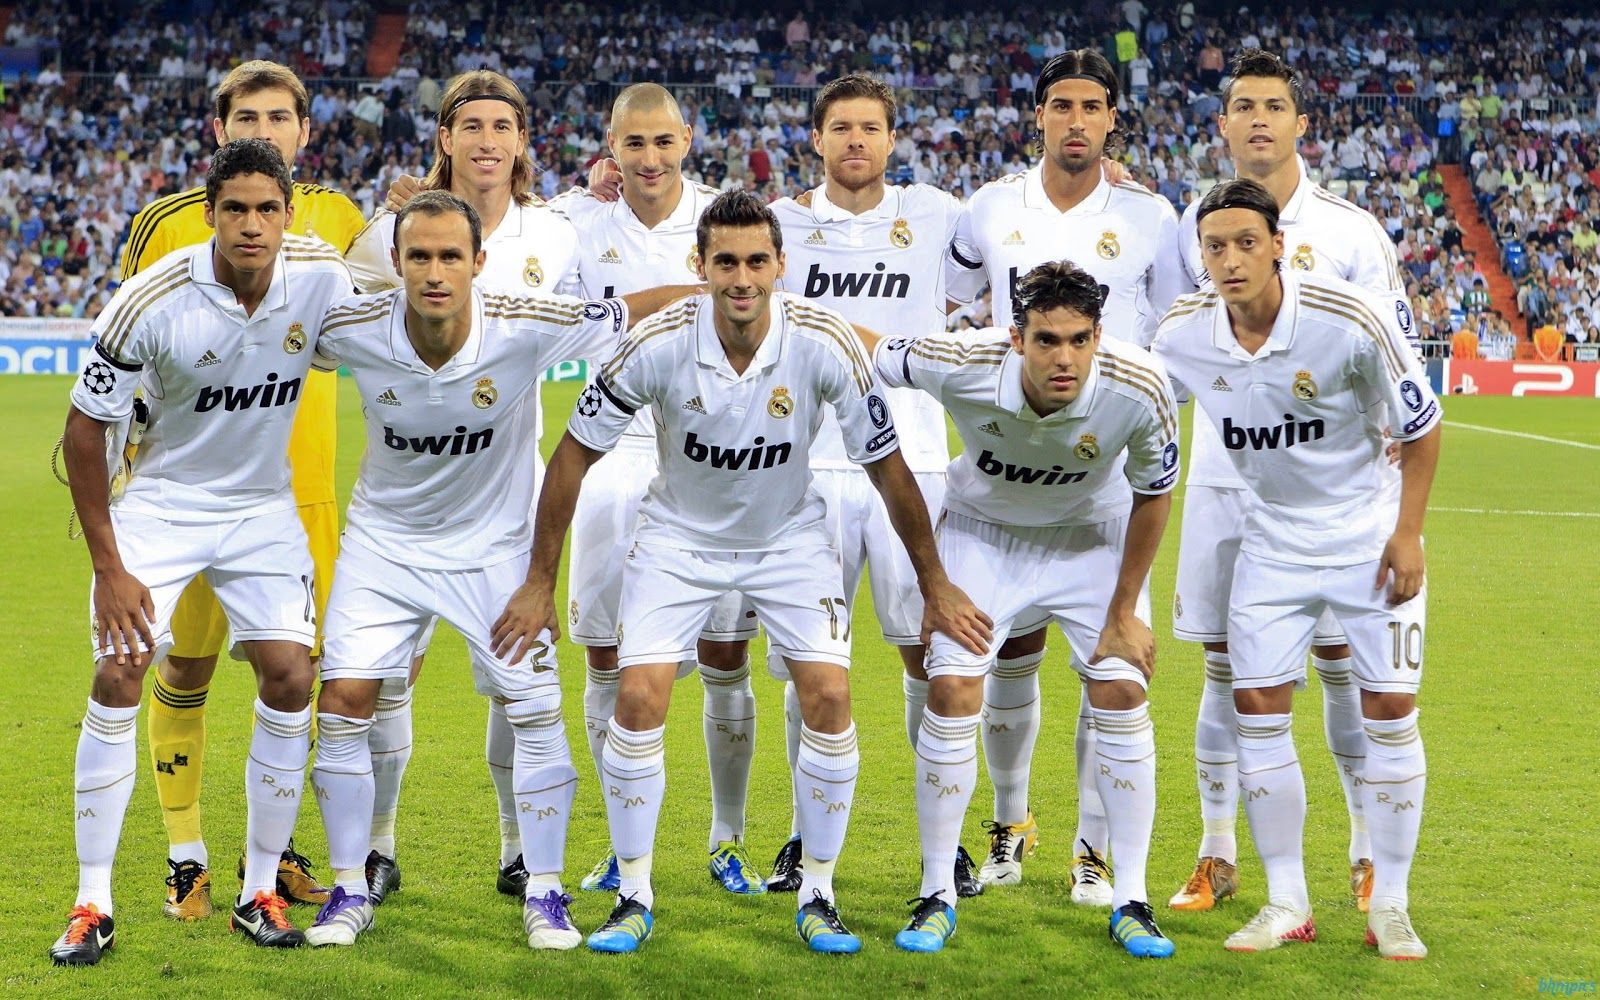 Real Madrid Pictures Players And Videos: Football 2013: Real Madrid